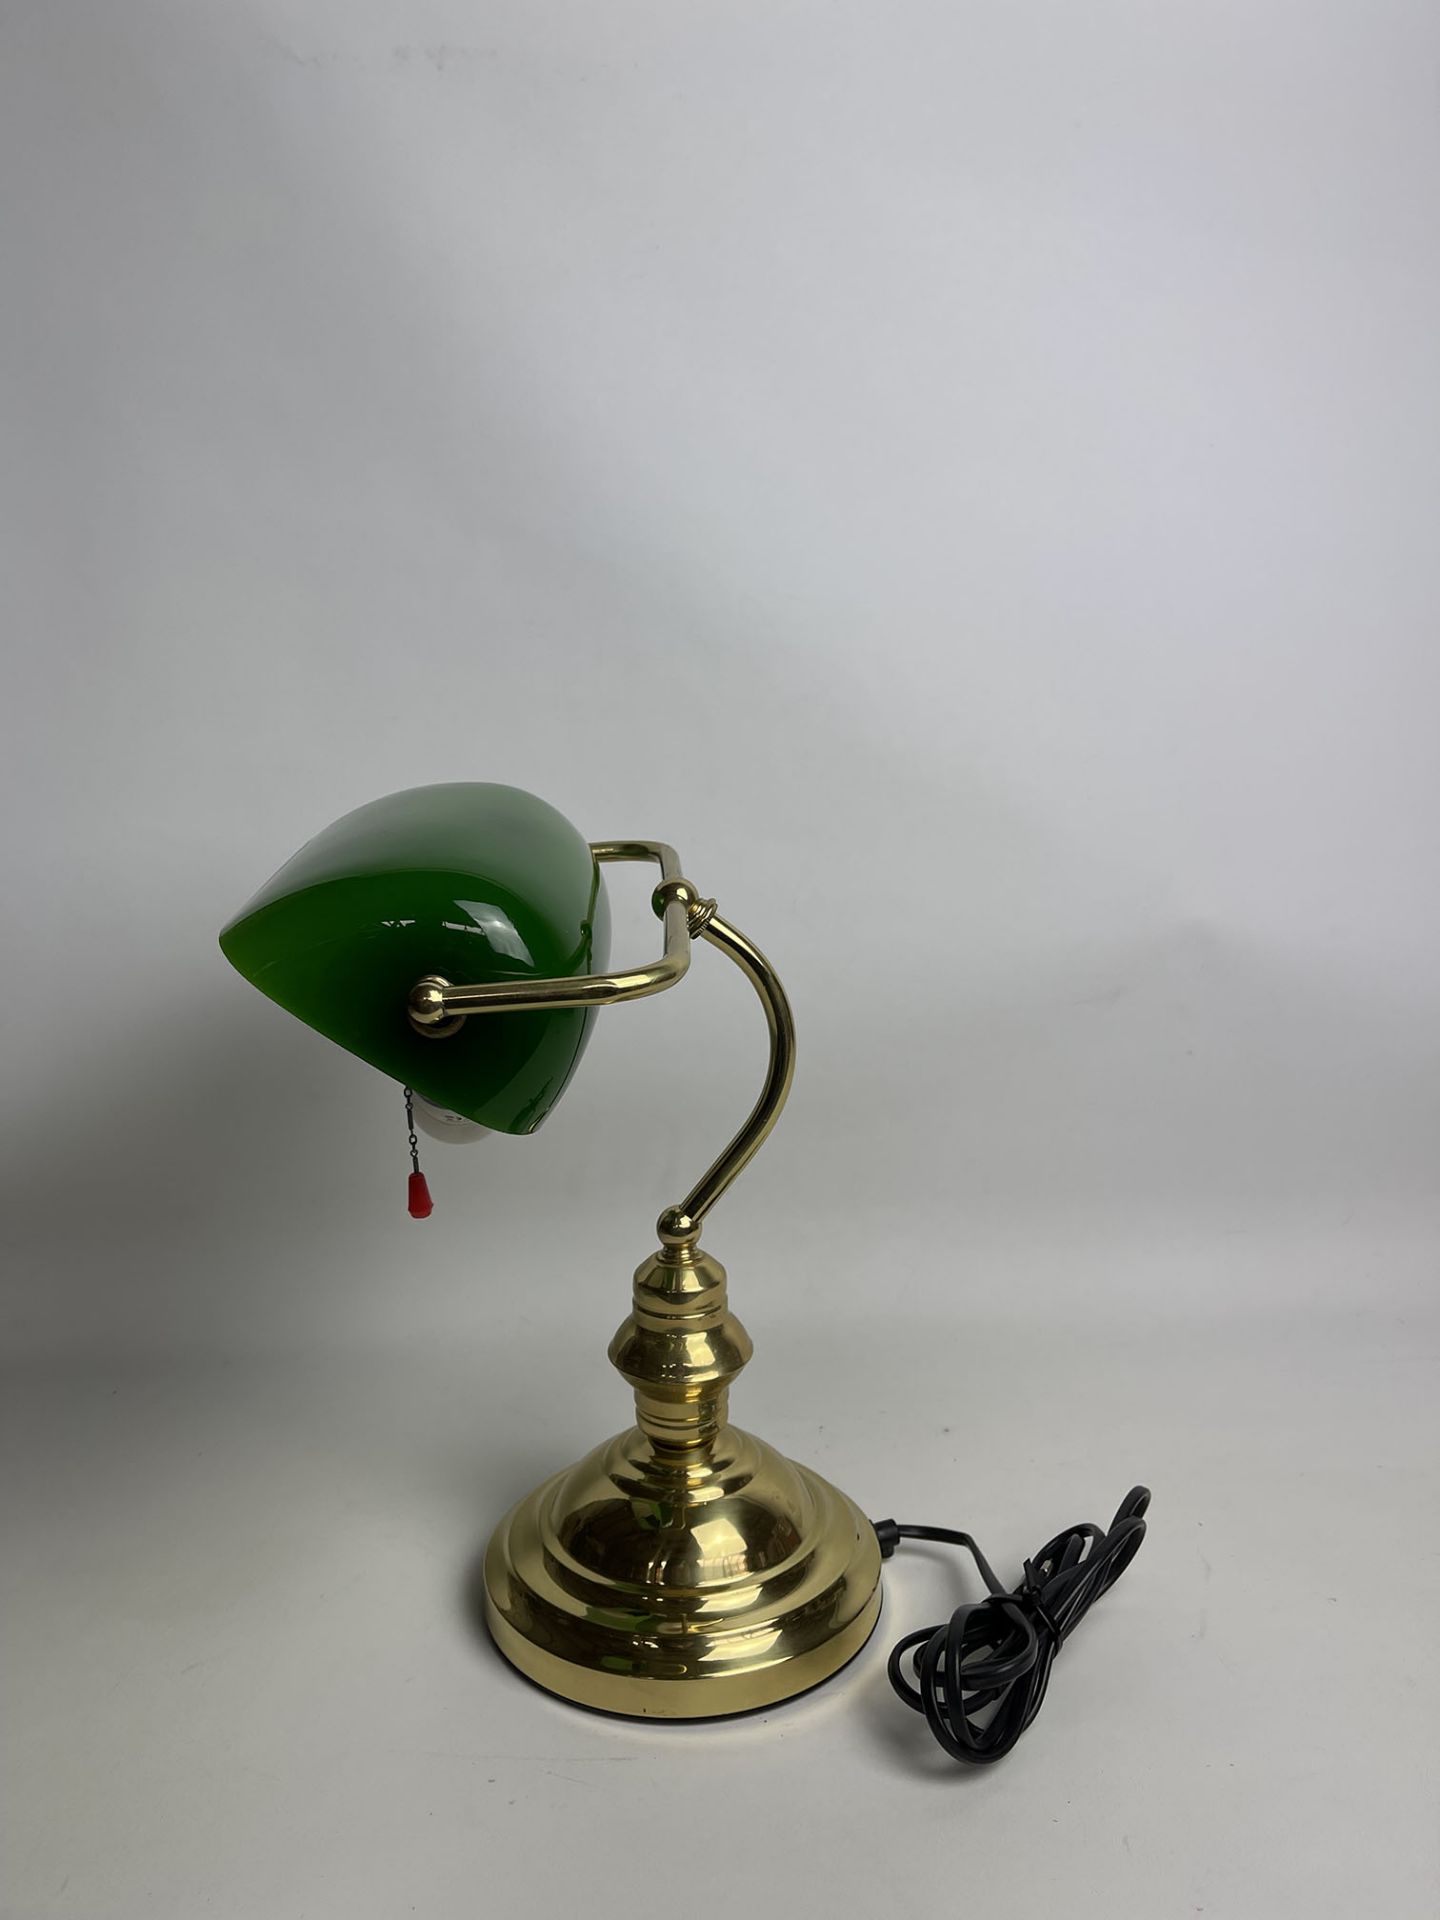 Vintage American Desk Lamp with Green Lamp Shade - Image 7 of 9